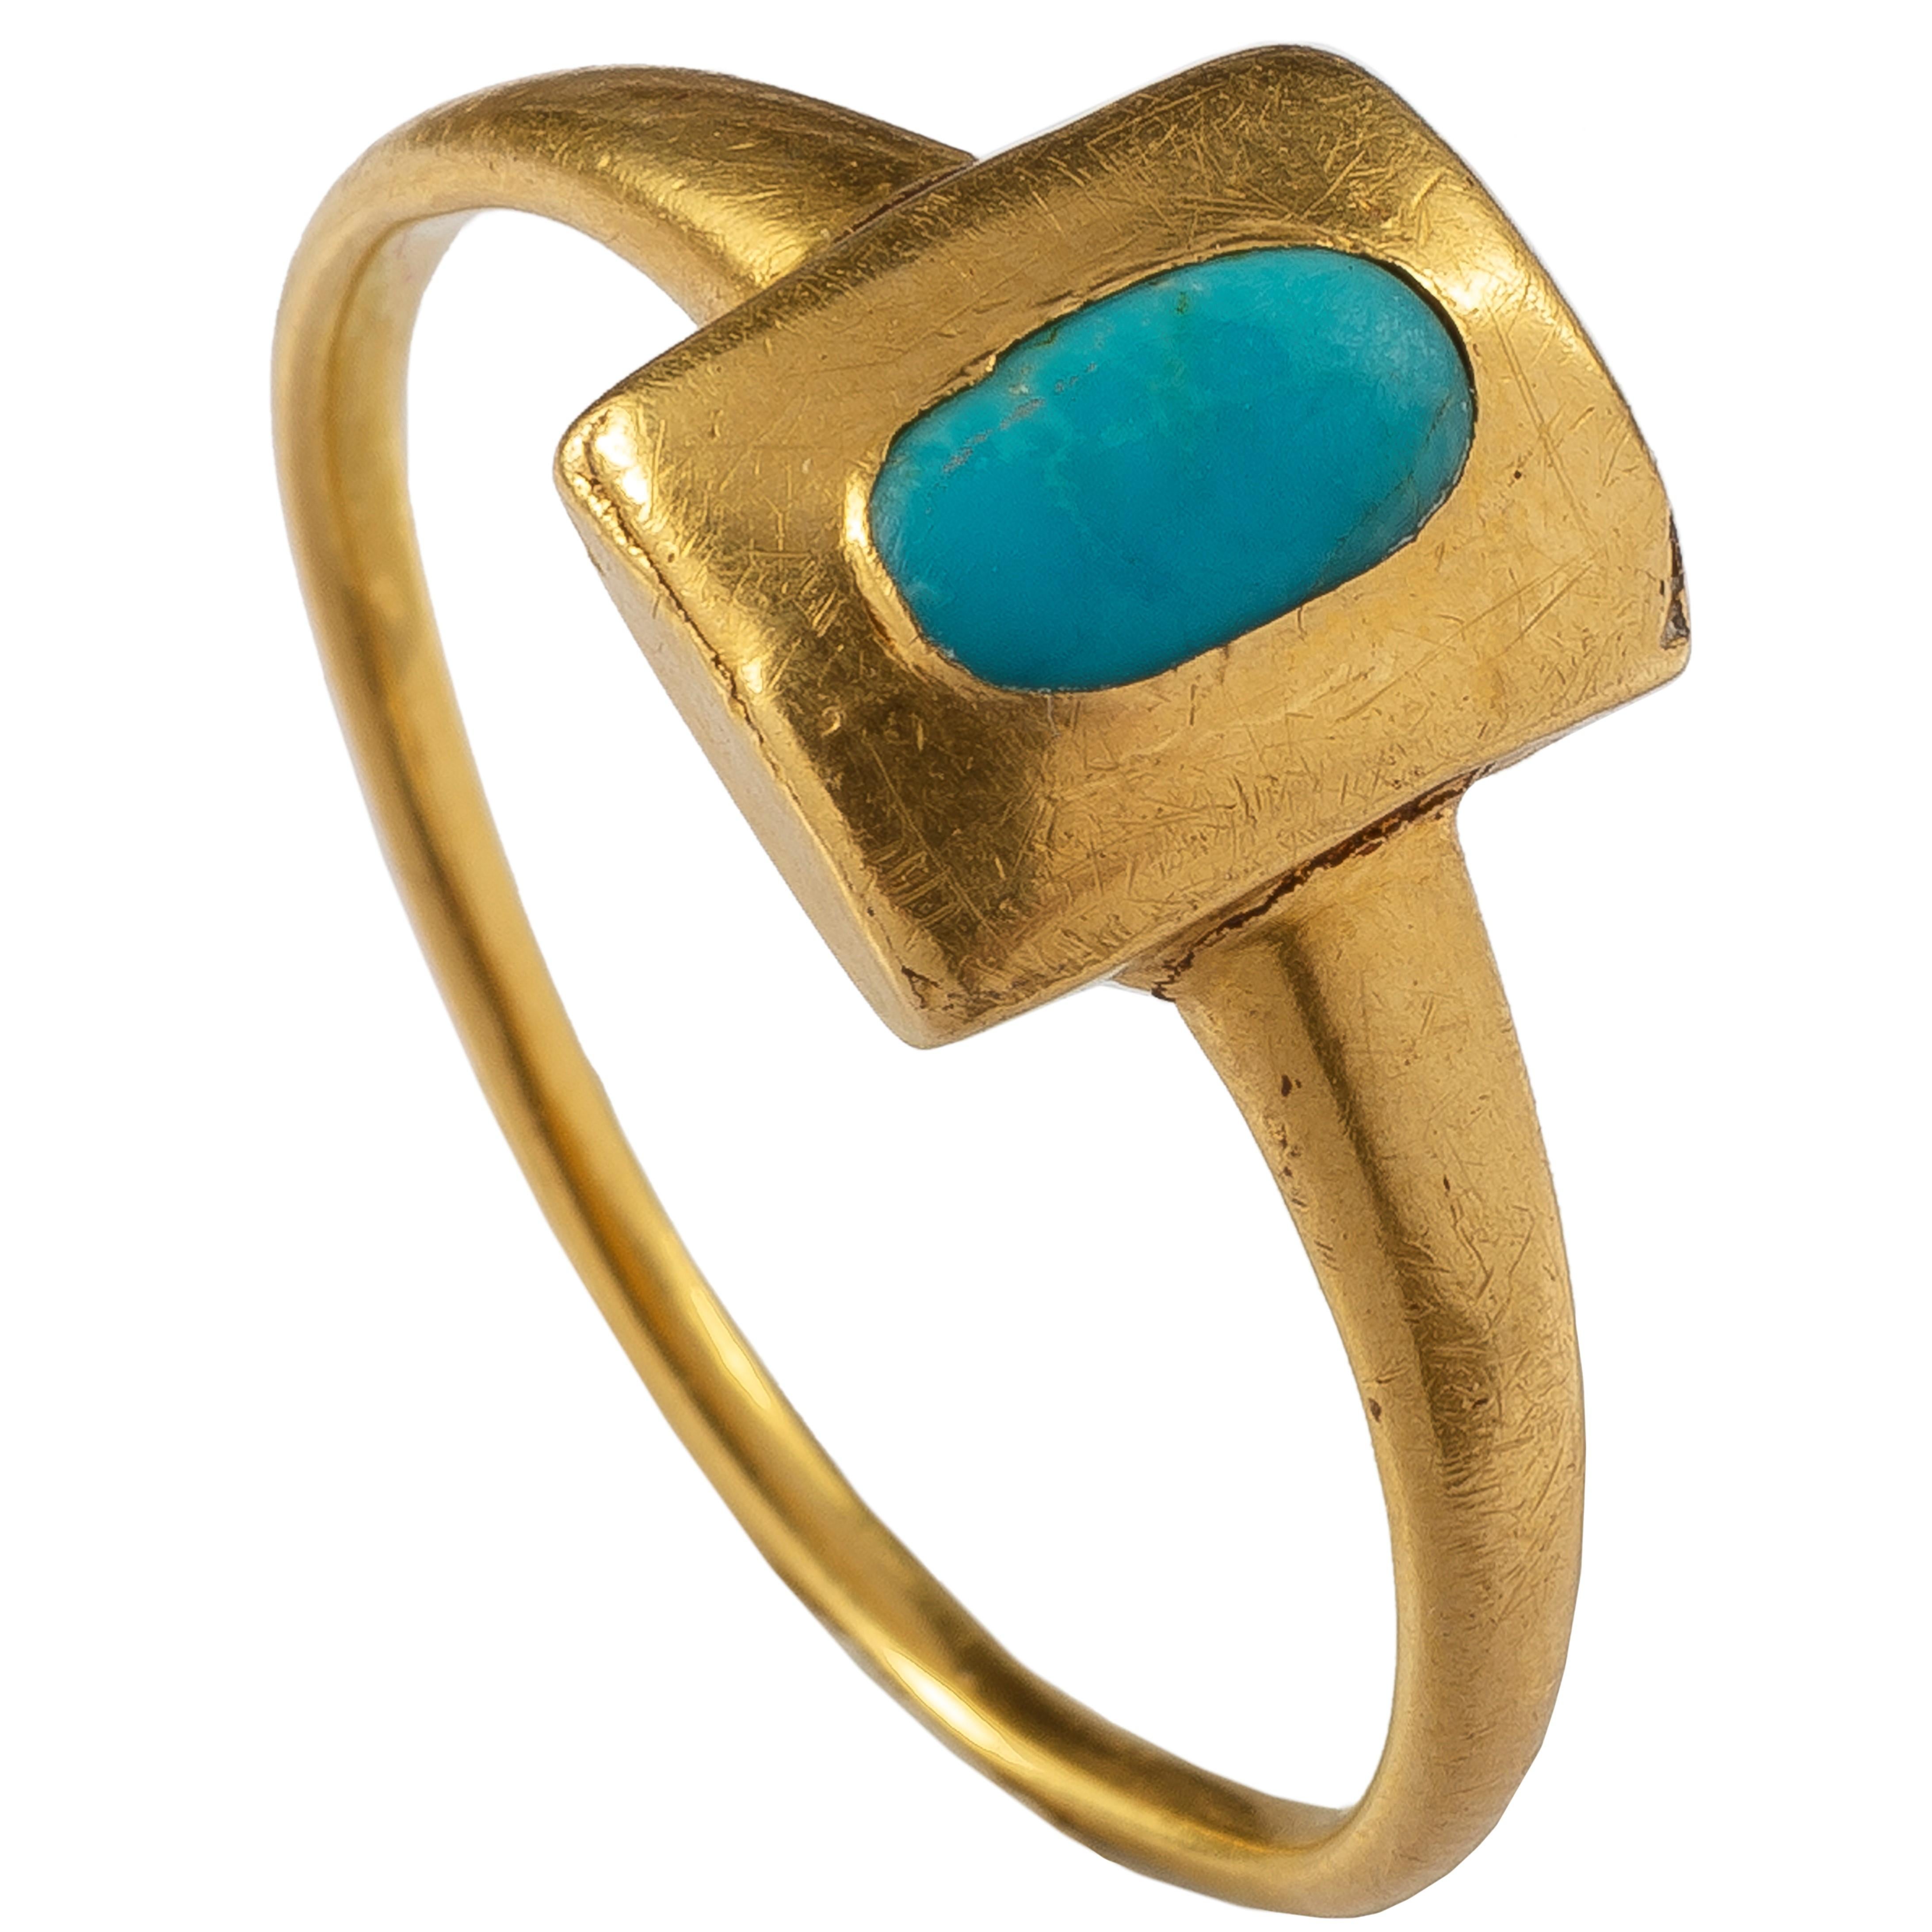 Antique Gold Renaissance Ring with Turquoise Cabochon 2